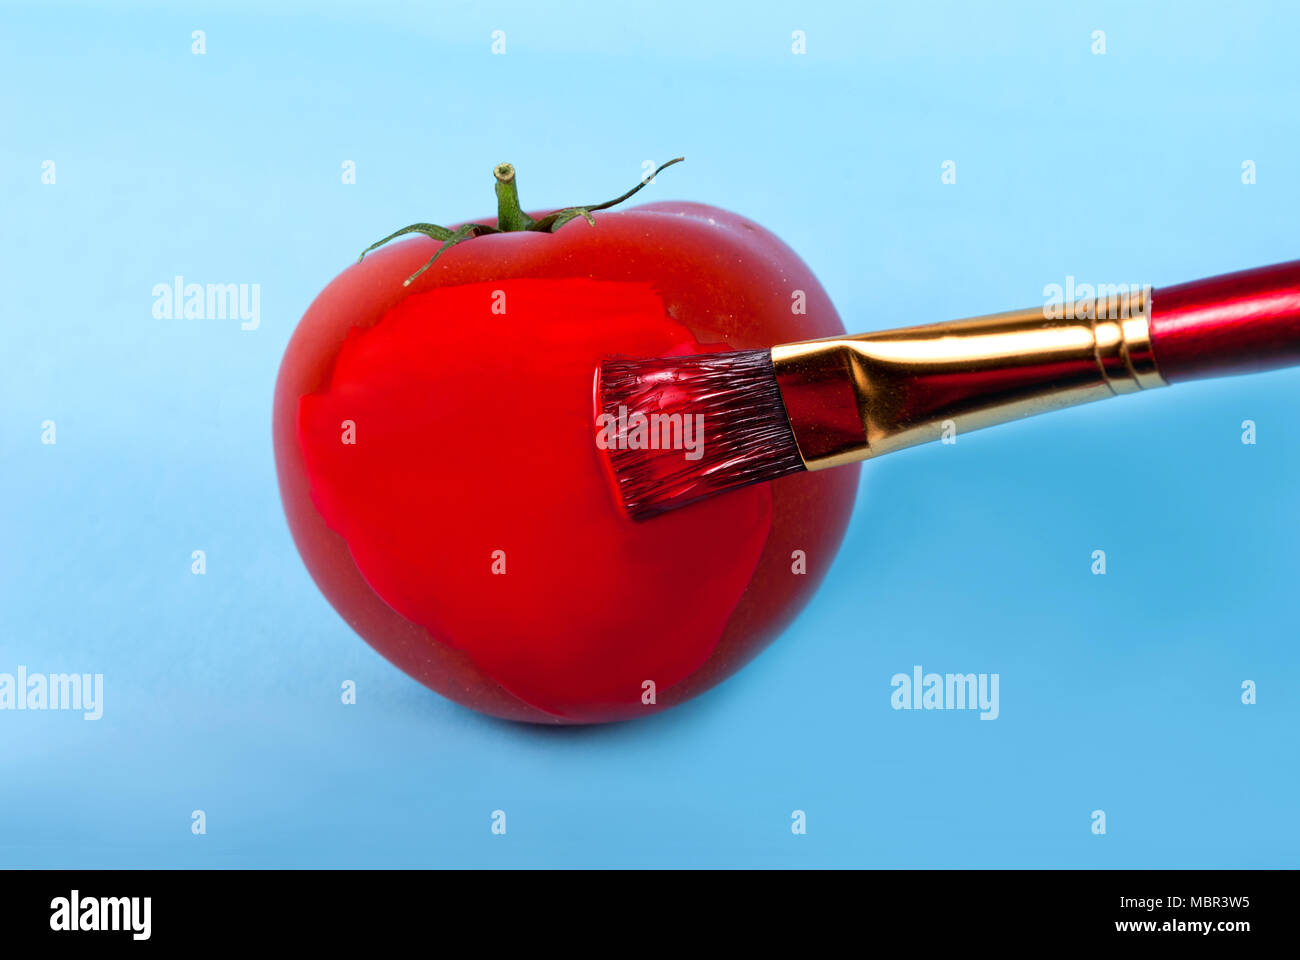 Brush paint tomatoes in red fresh color on a blue background, concept of unhealthy food Stock Photo